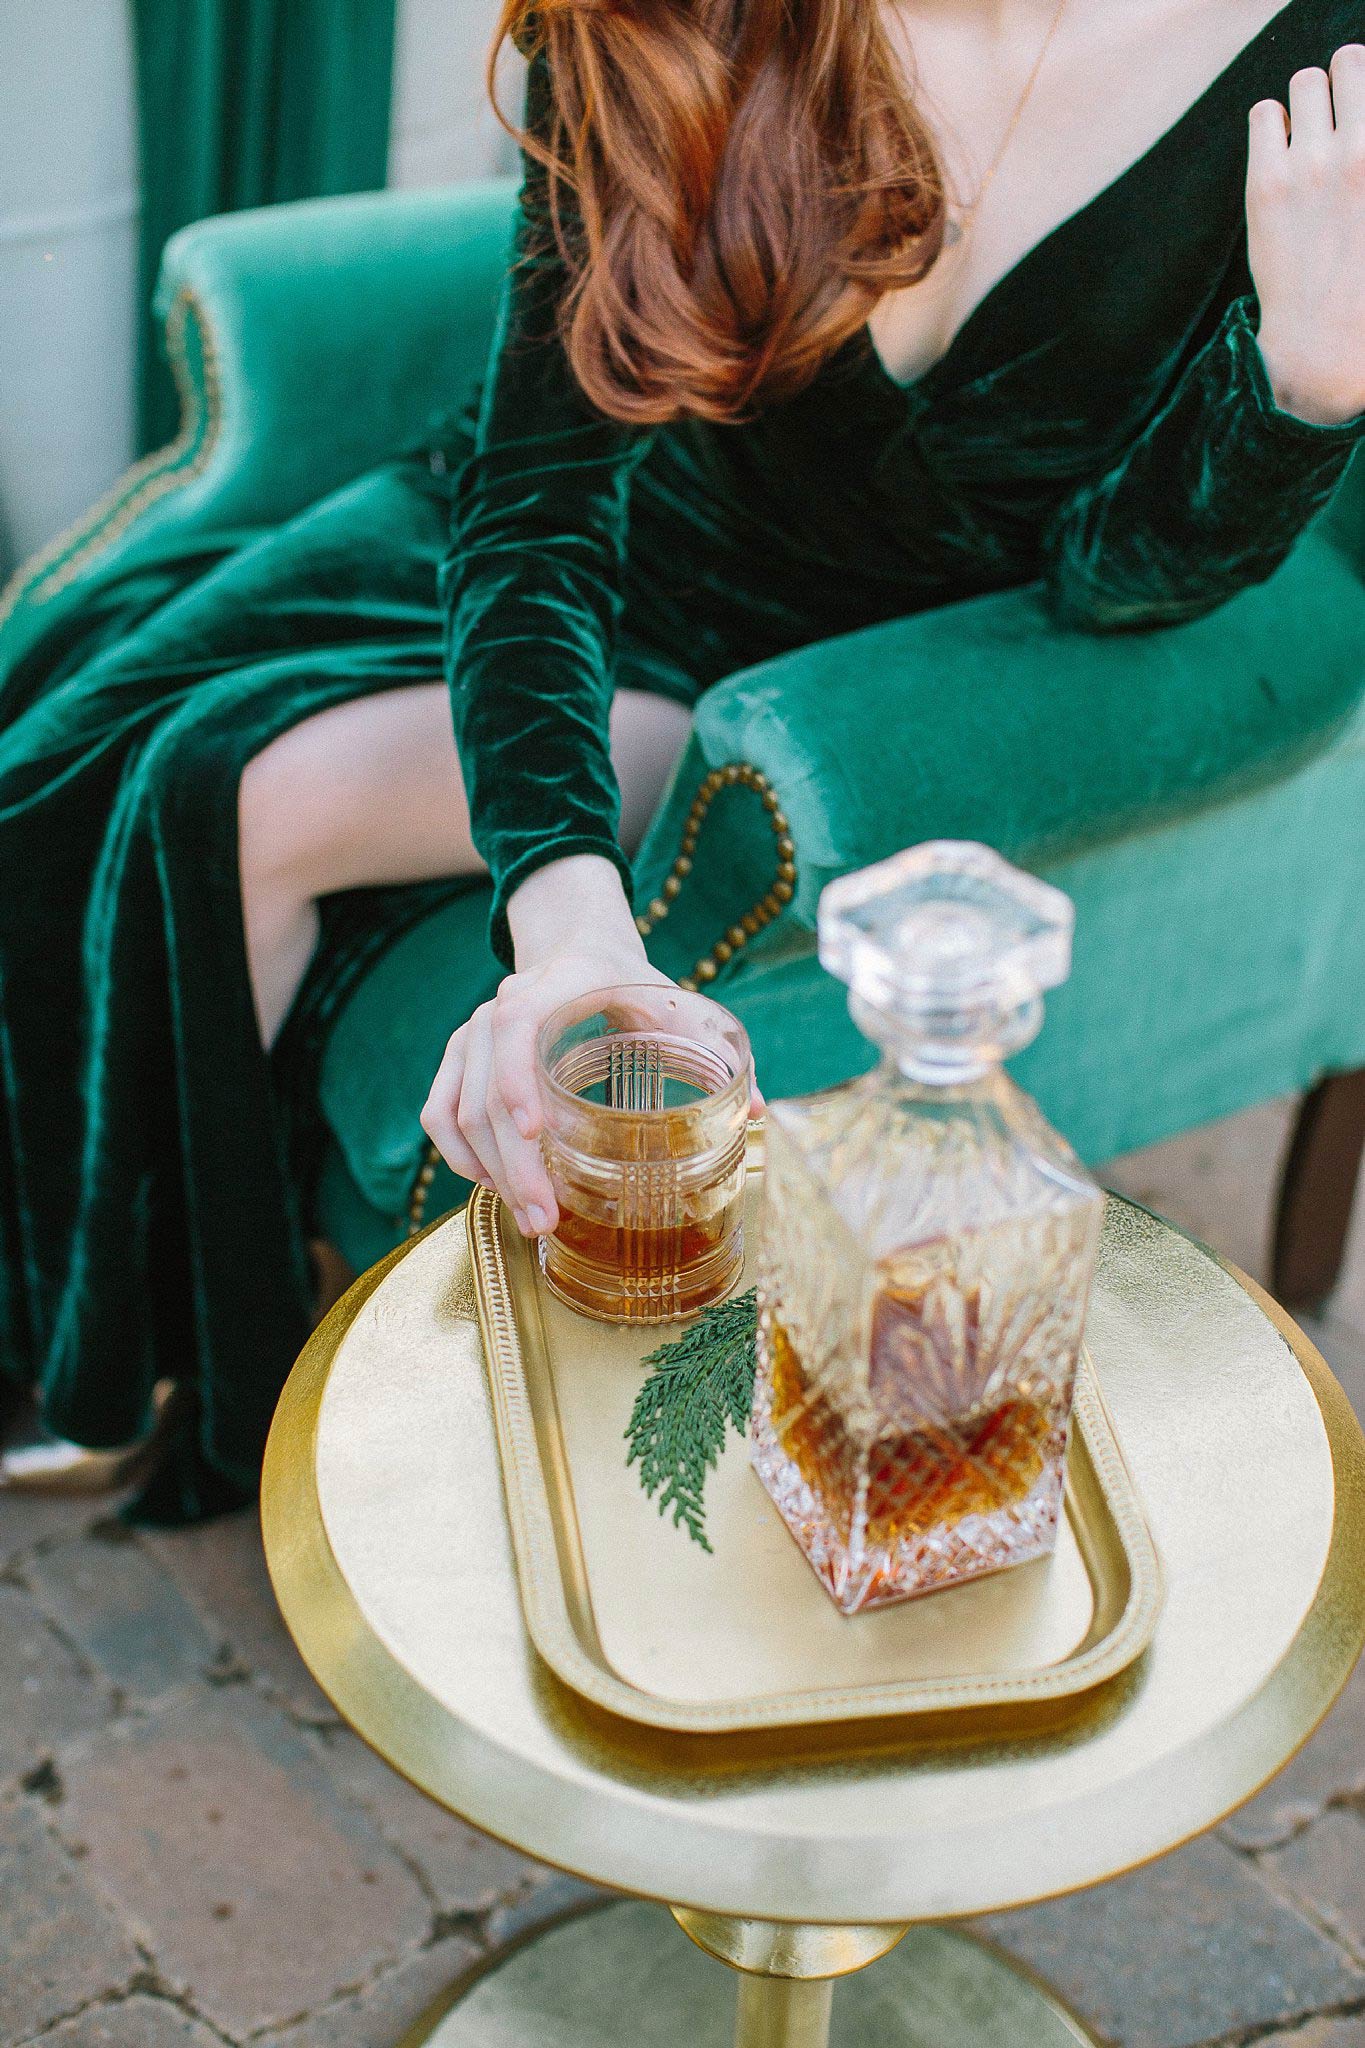 Woman in wearing a winter wedding colors velvet dress in emerald green, sitting in green chair reaching for whiskey glass